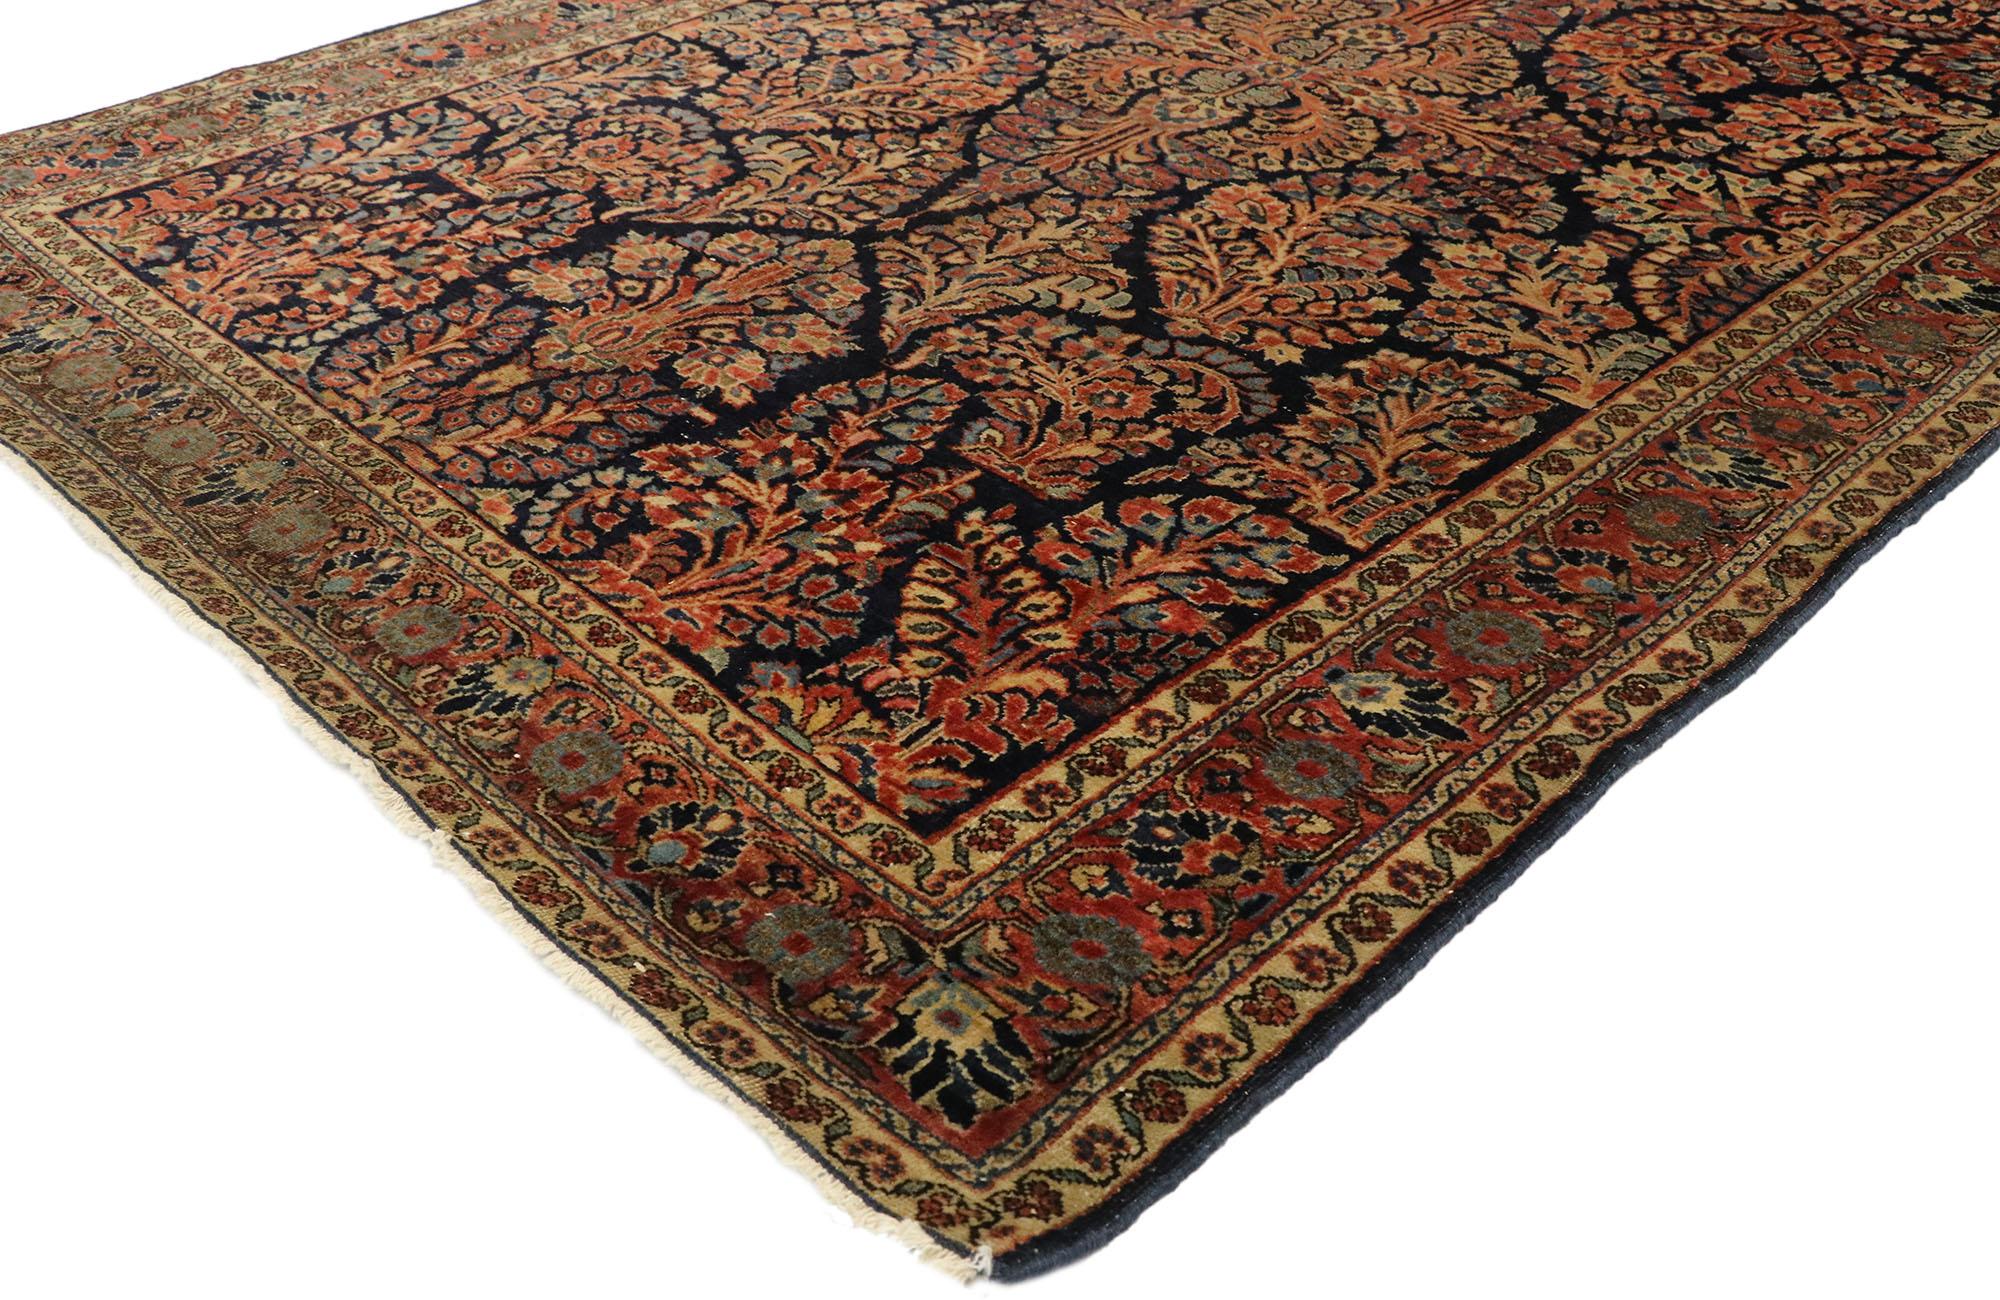 77460, distressed antique Persian Mohajeran Sarouk rug with French Baroque Victorian style, small accent rug. Sure to captivate the most discerning aesthete, this hand knotted wool distressed antique Persian Mohajeran Sarouk rug is the epitome of